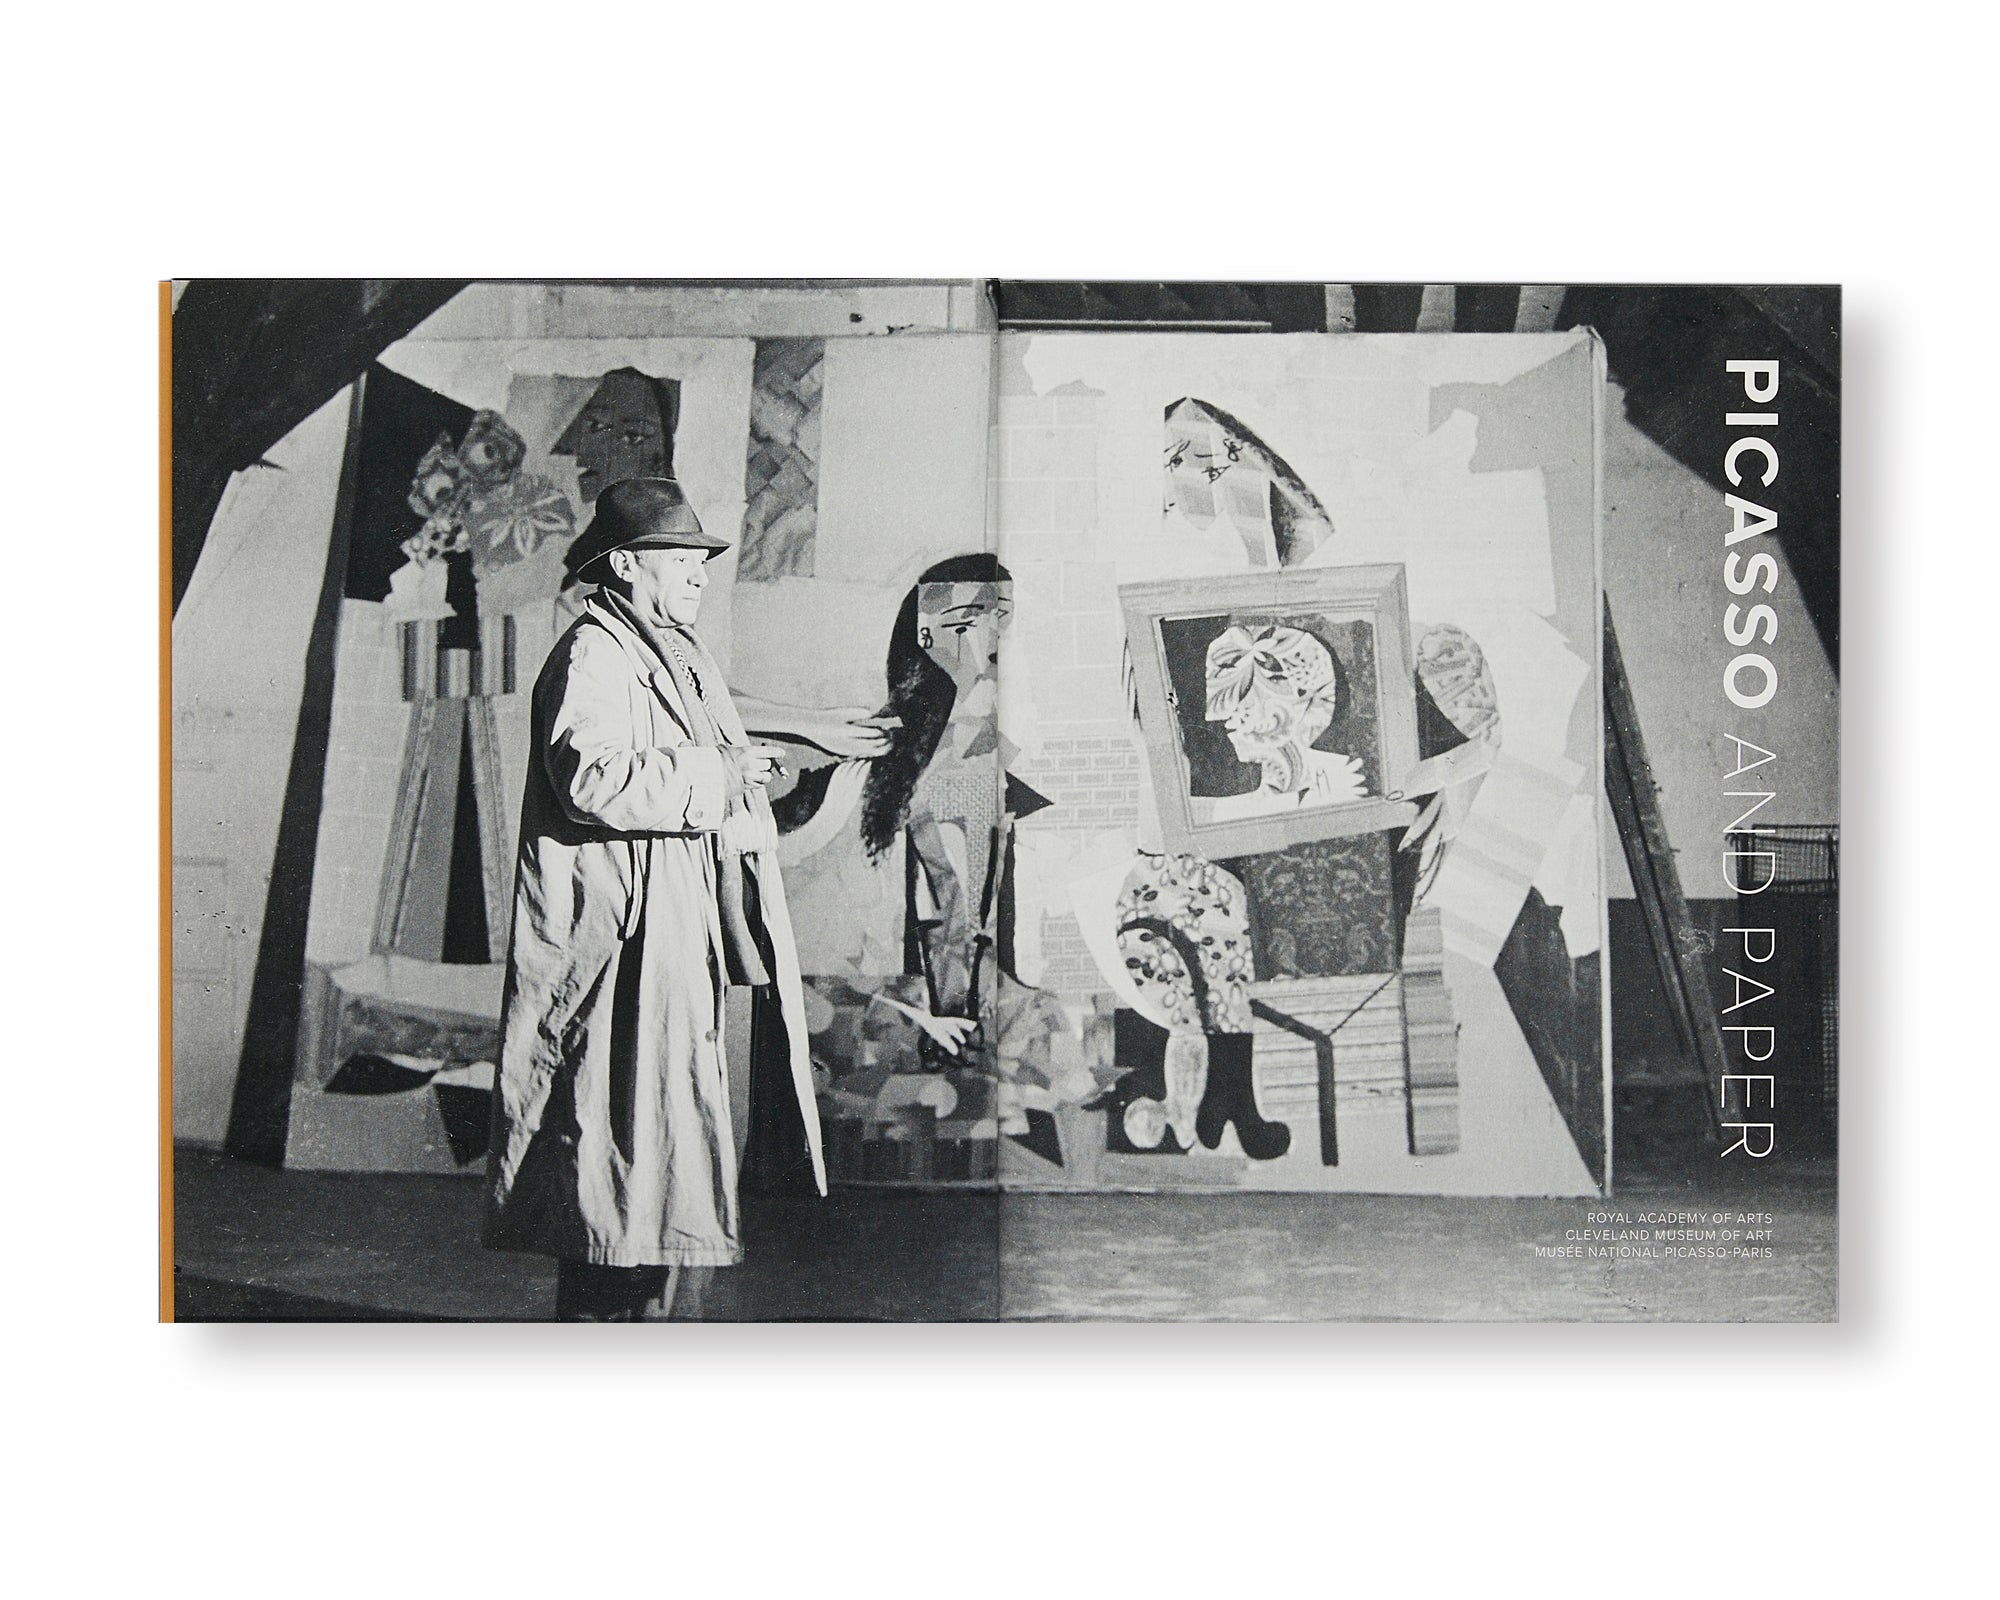 PICASSO AND PAPER by Pablo Picasso